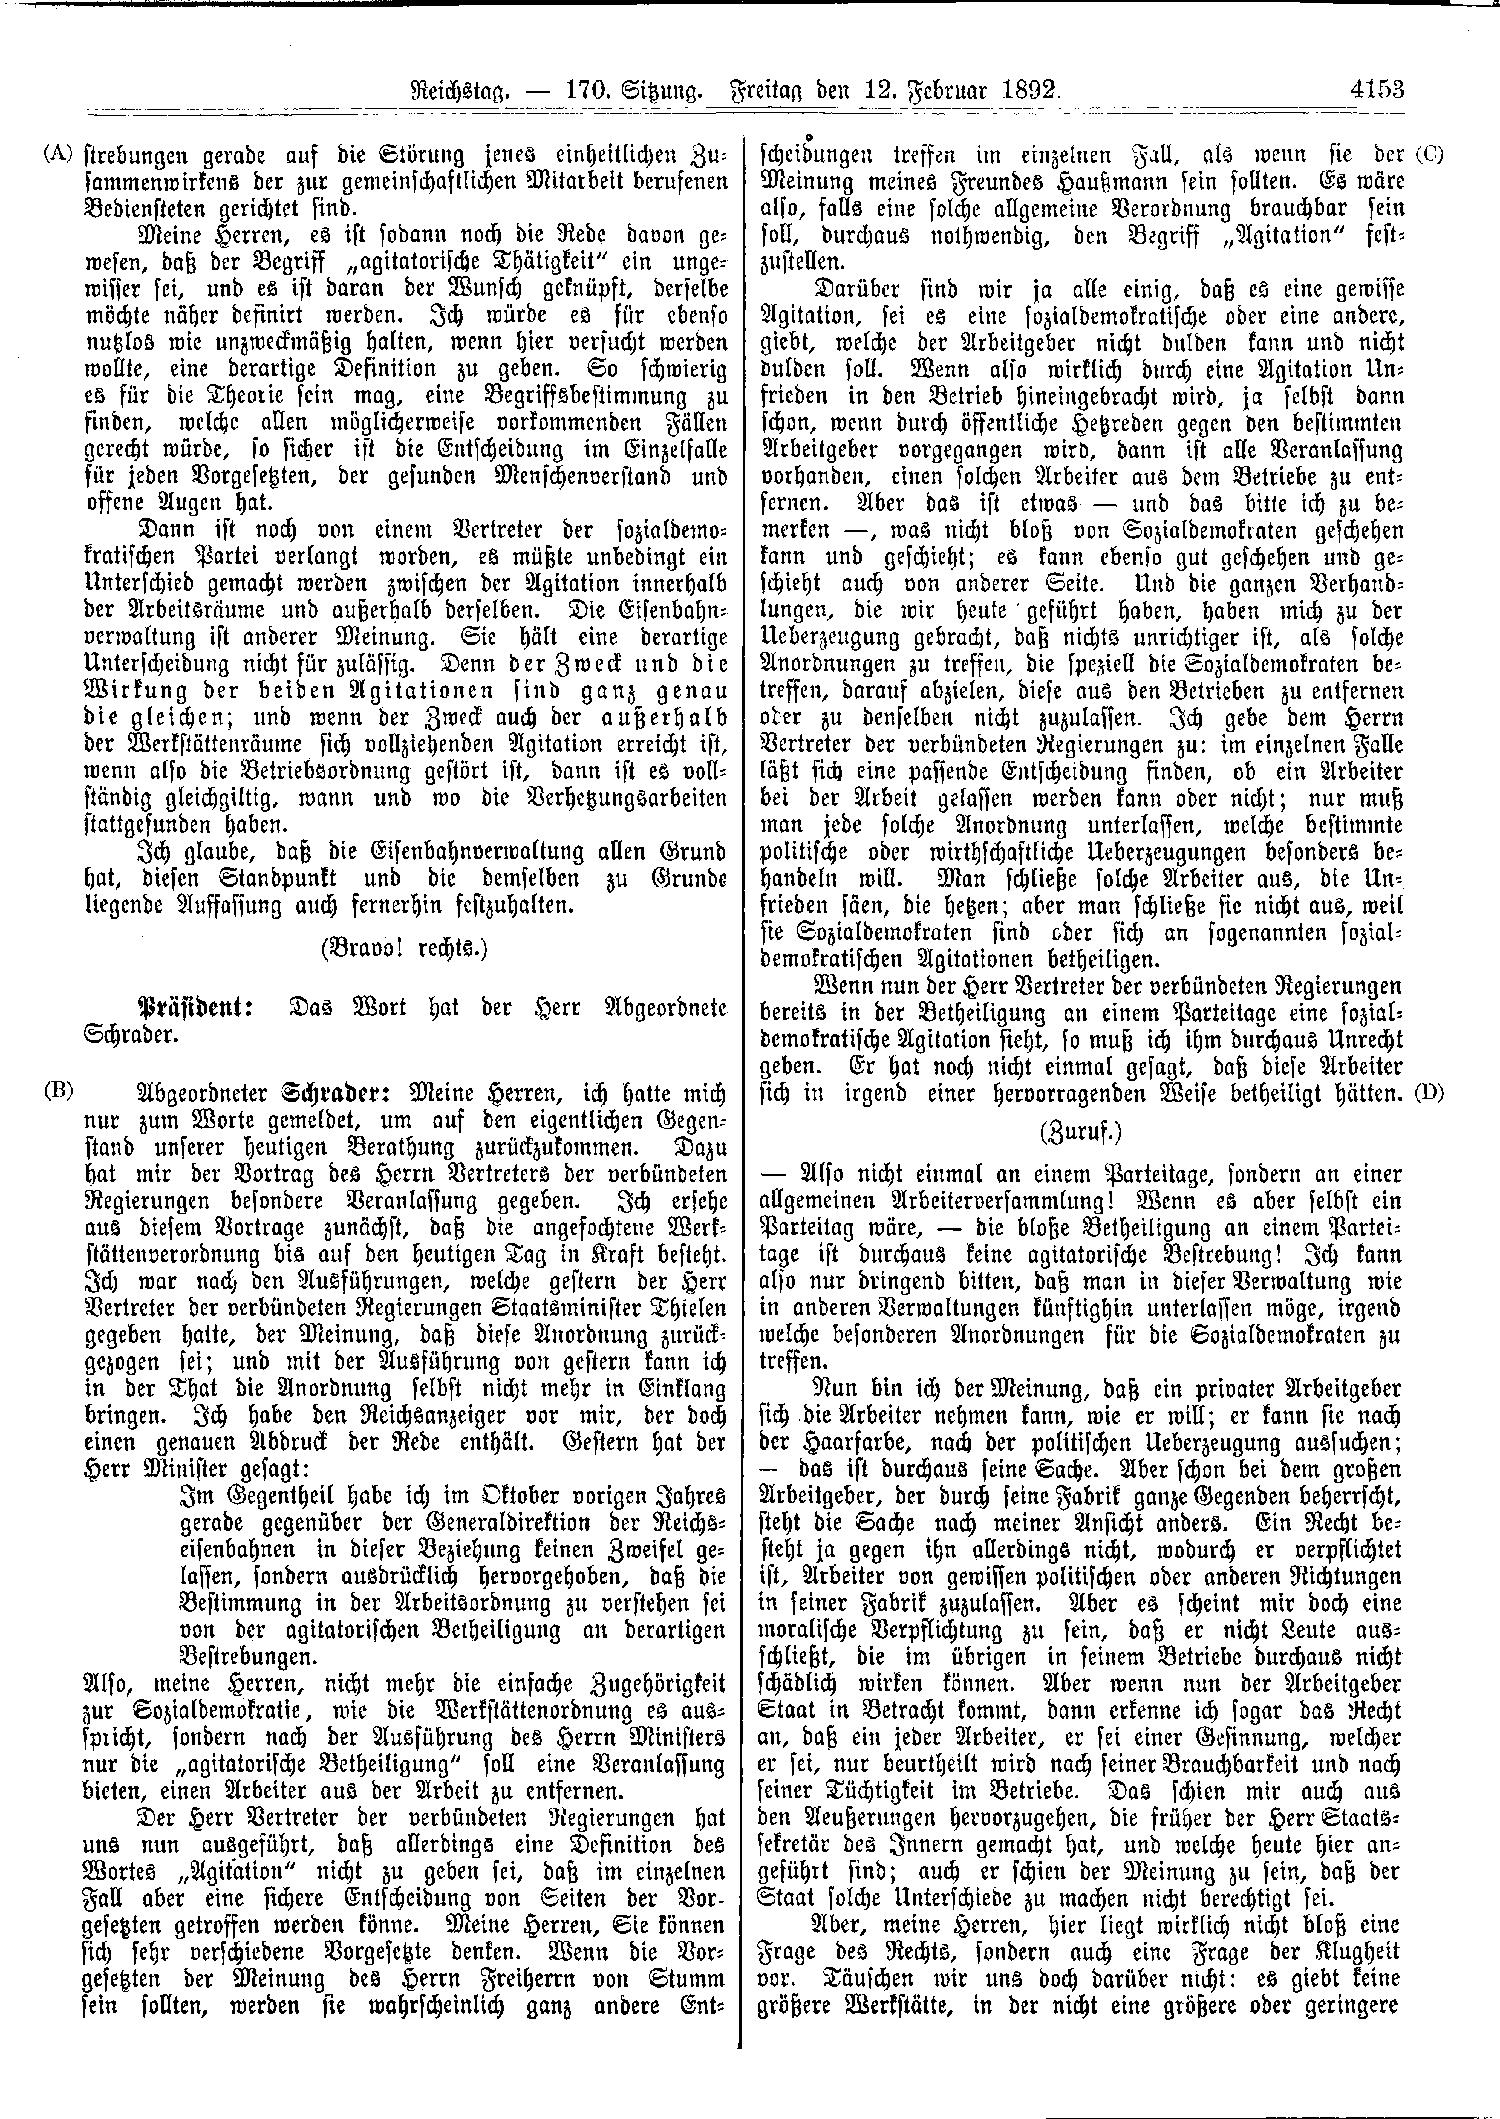 Scan of page 4153